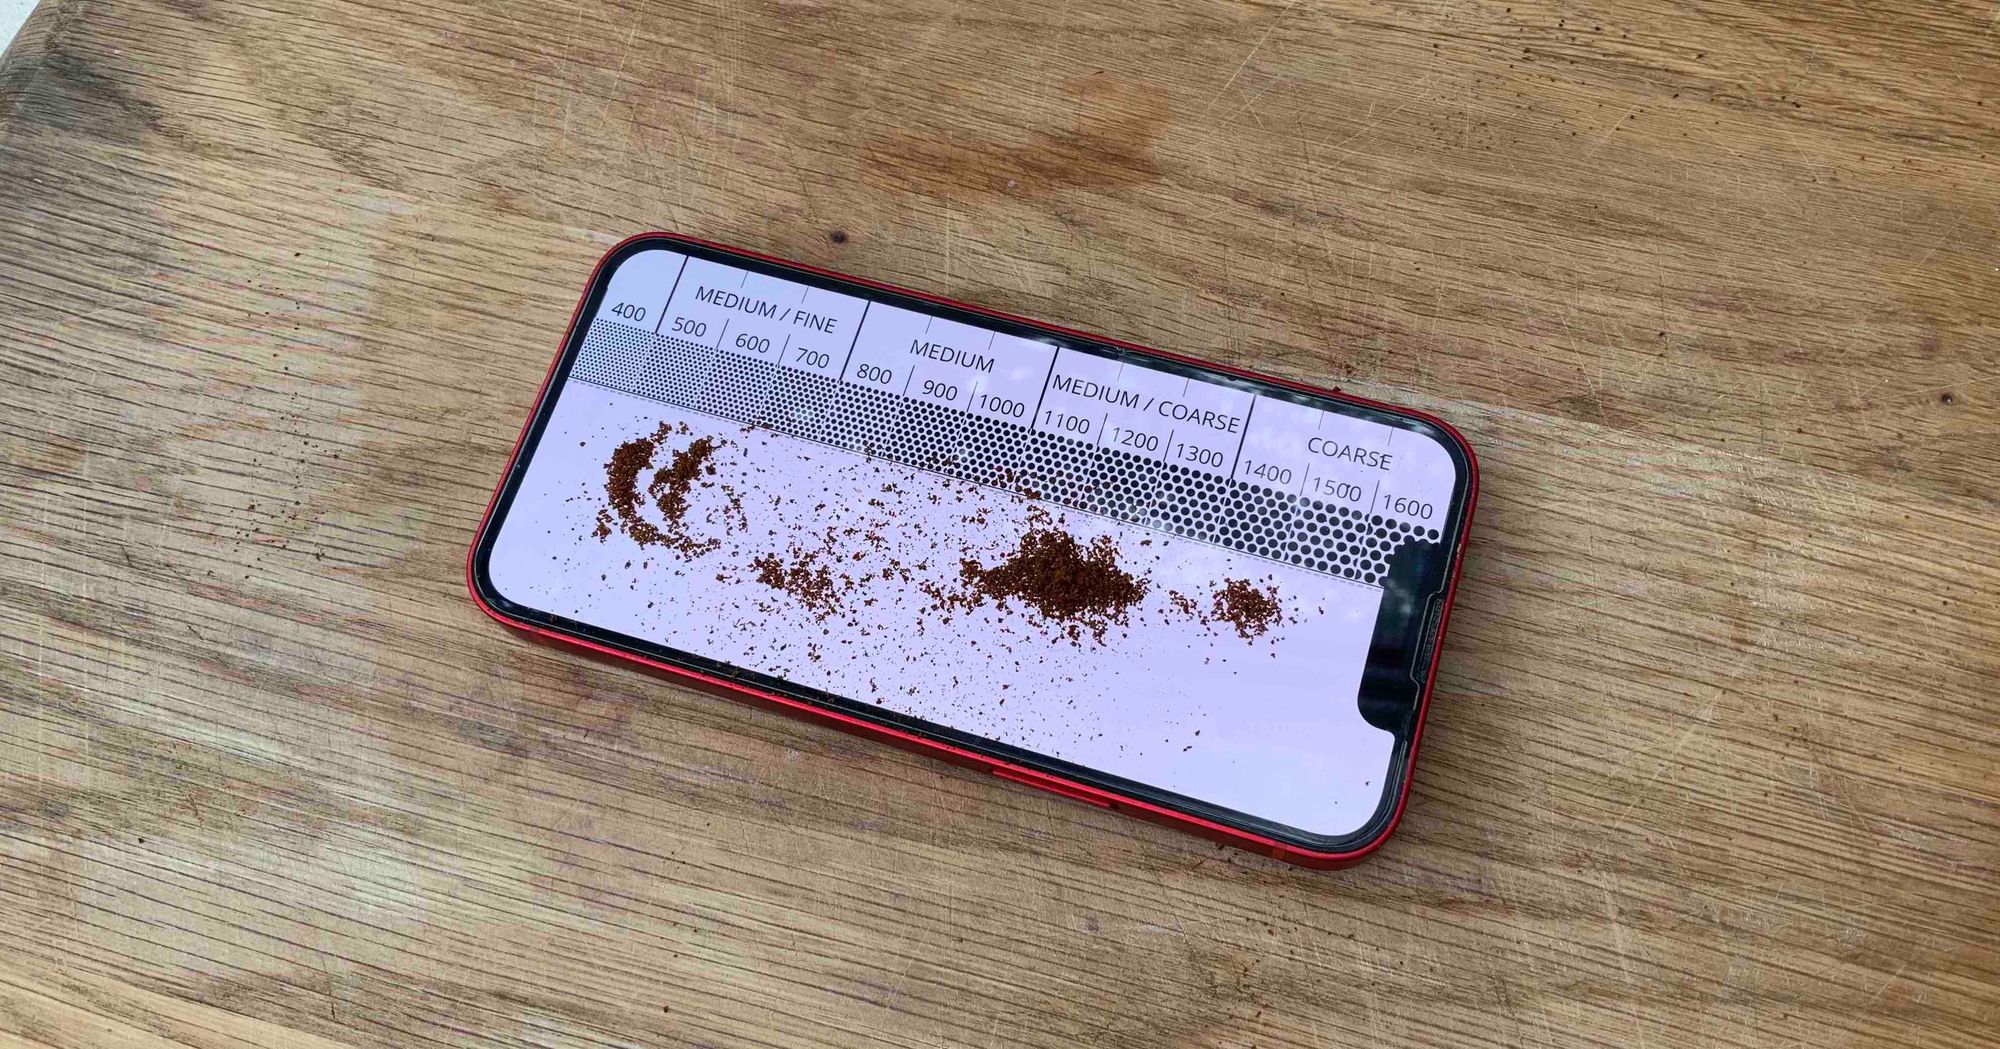 Measure Coffee Grind Size with iPad and iPhone